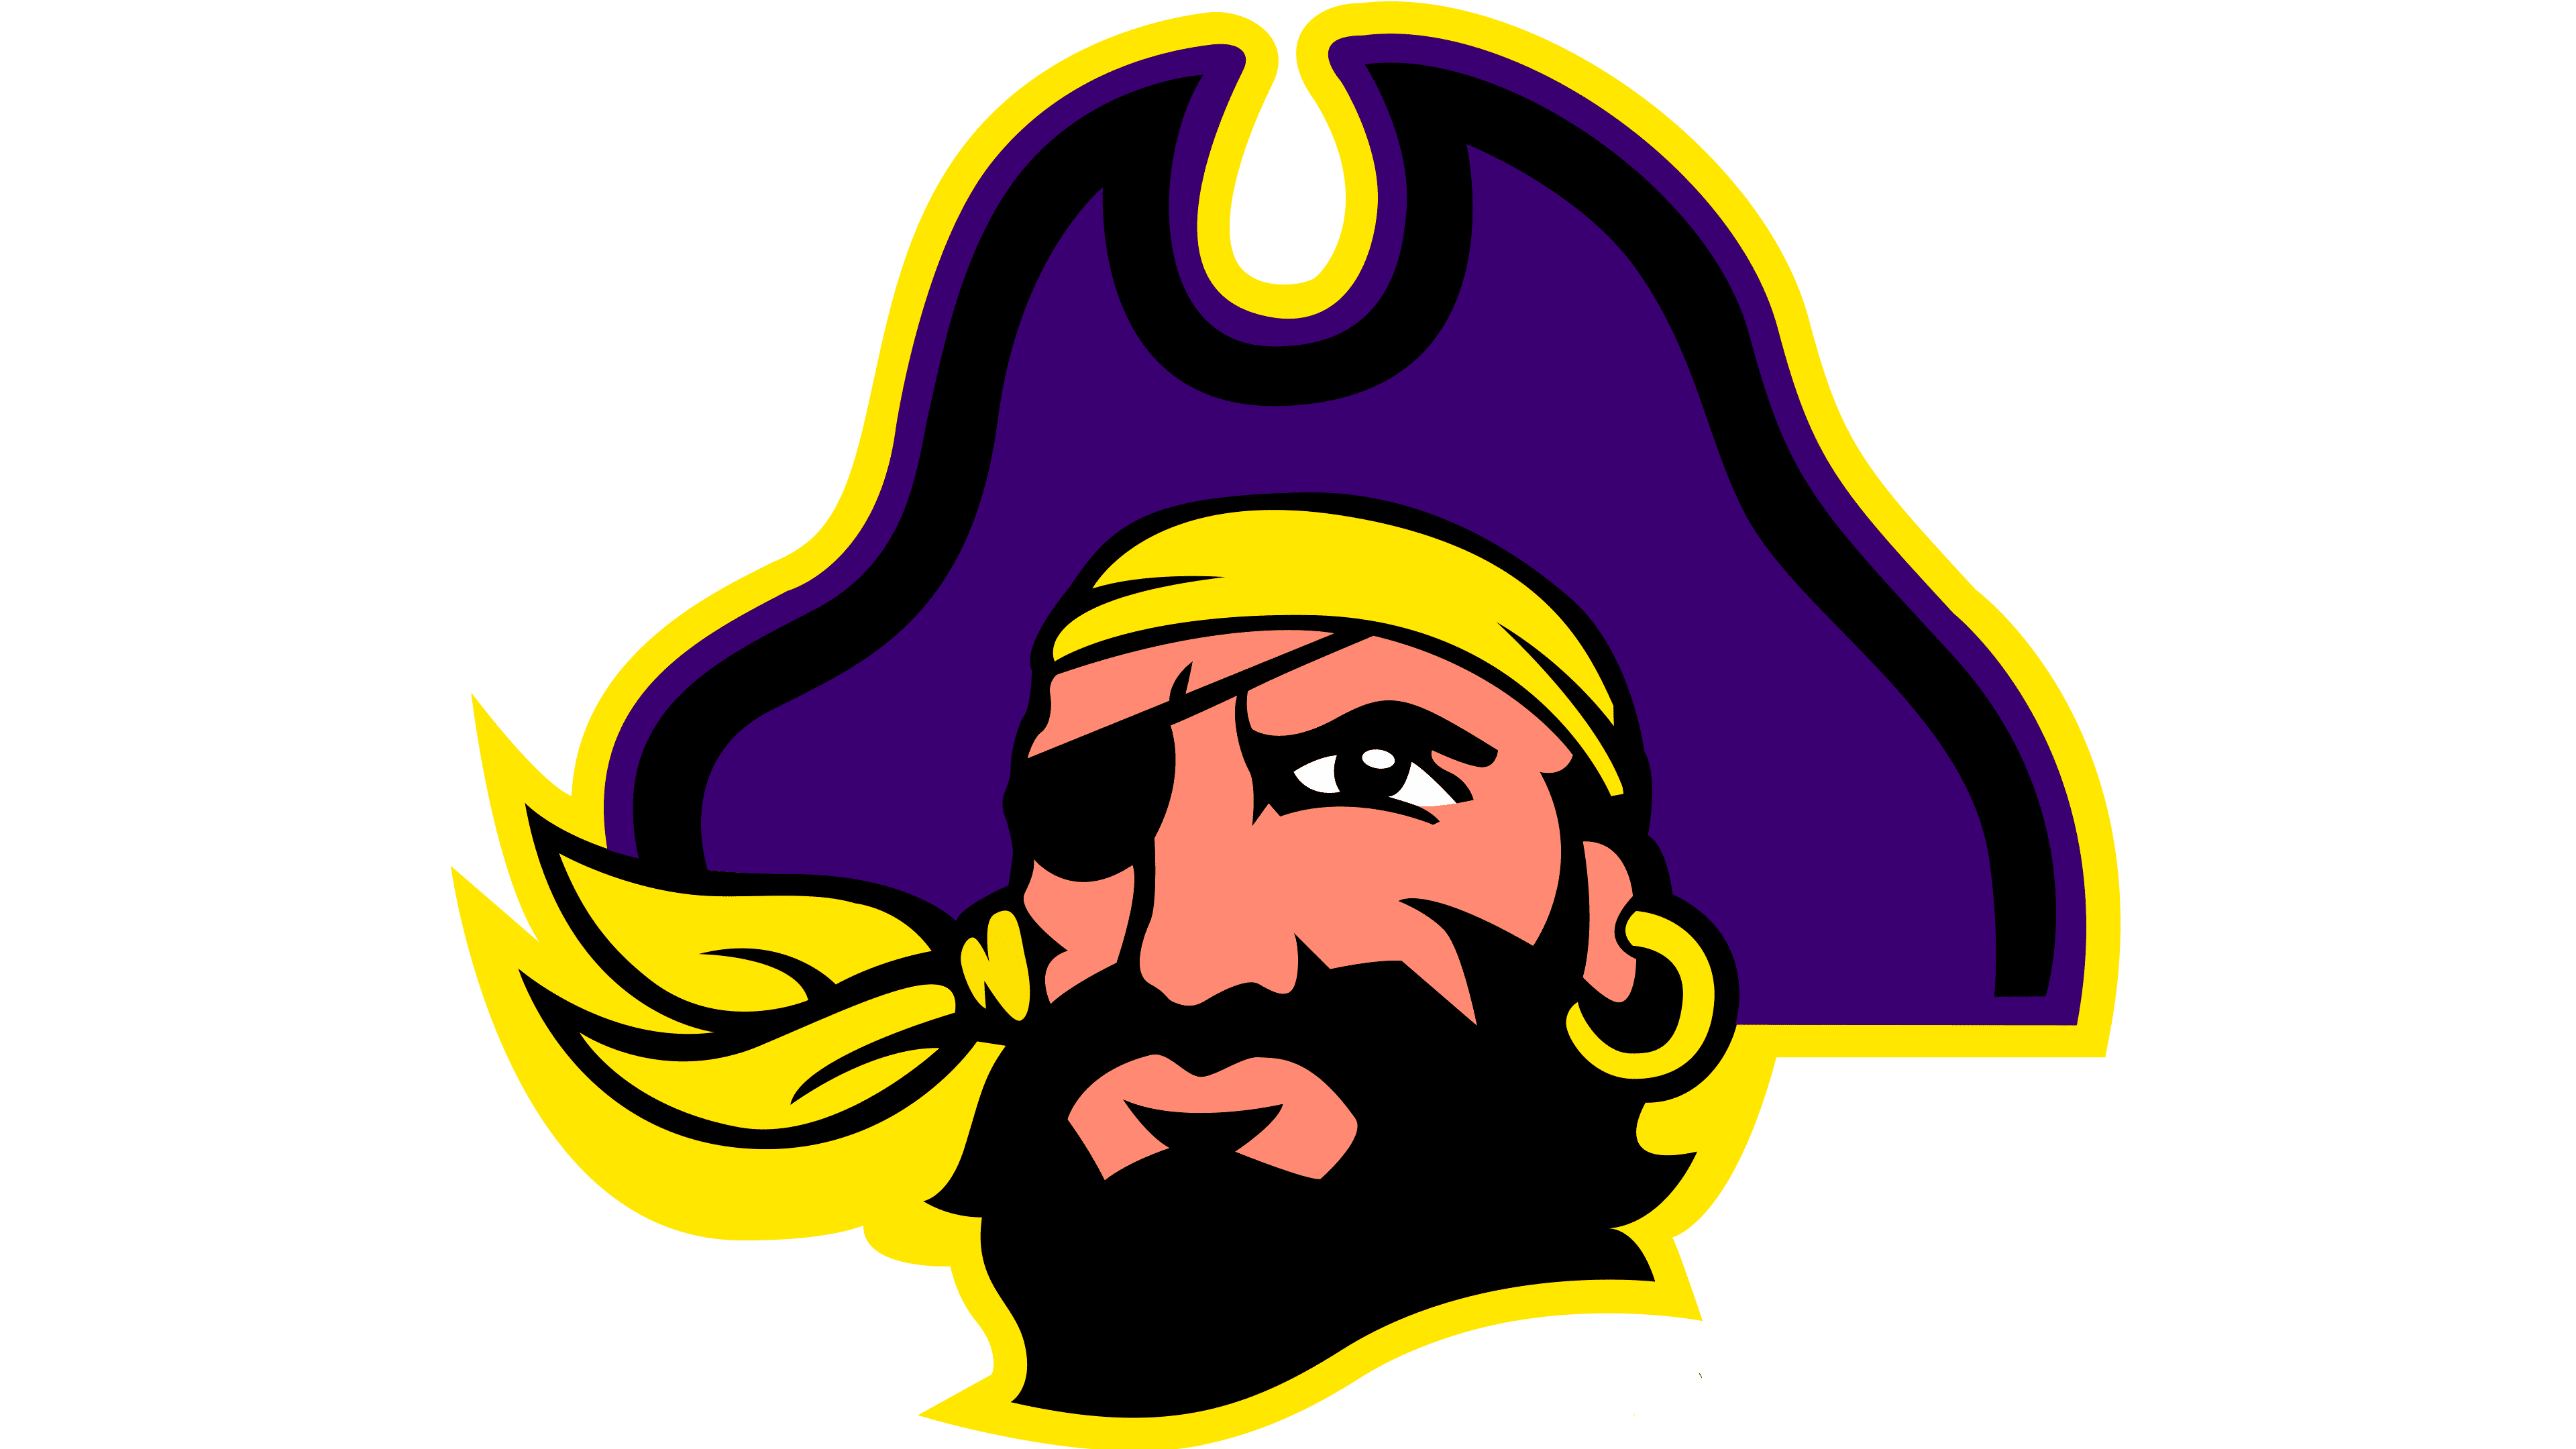 East Carolina Pirates Logo | The most famous brands and company logos